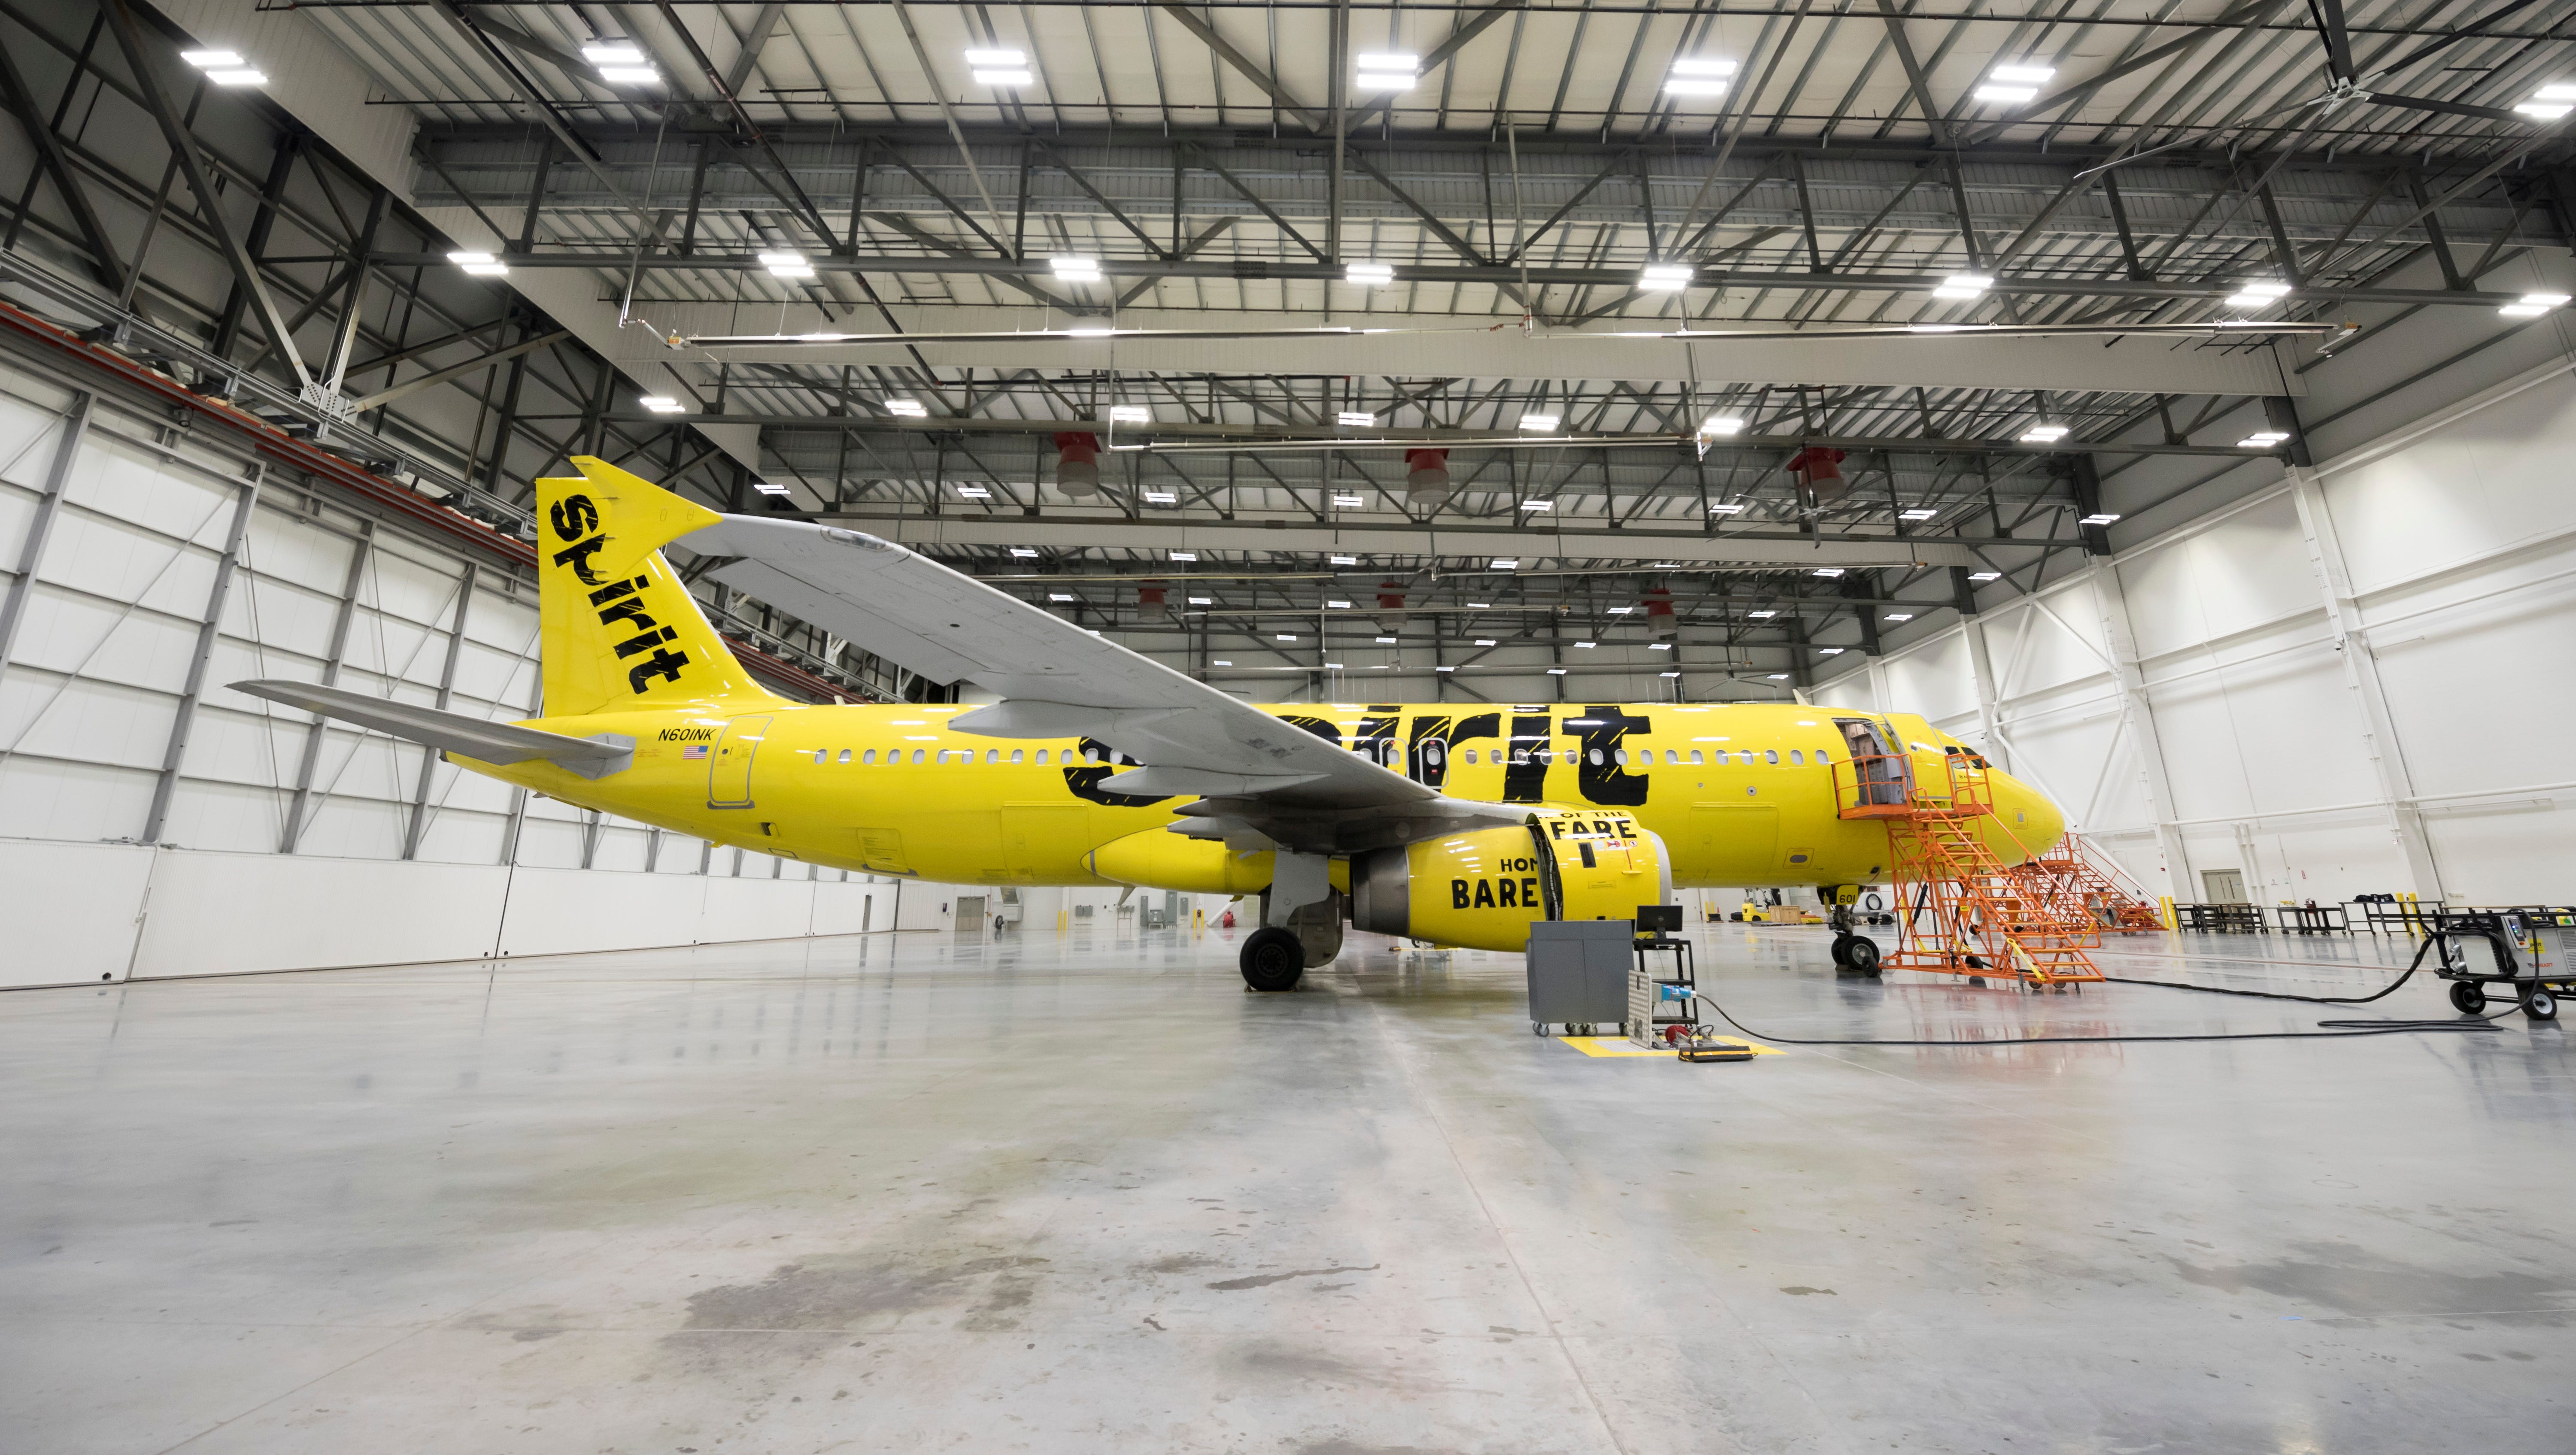 An A320 "operational spare" airplane sits in the main hangar bay for the new maintenance hangar for Spirit Airlines.